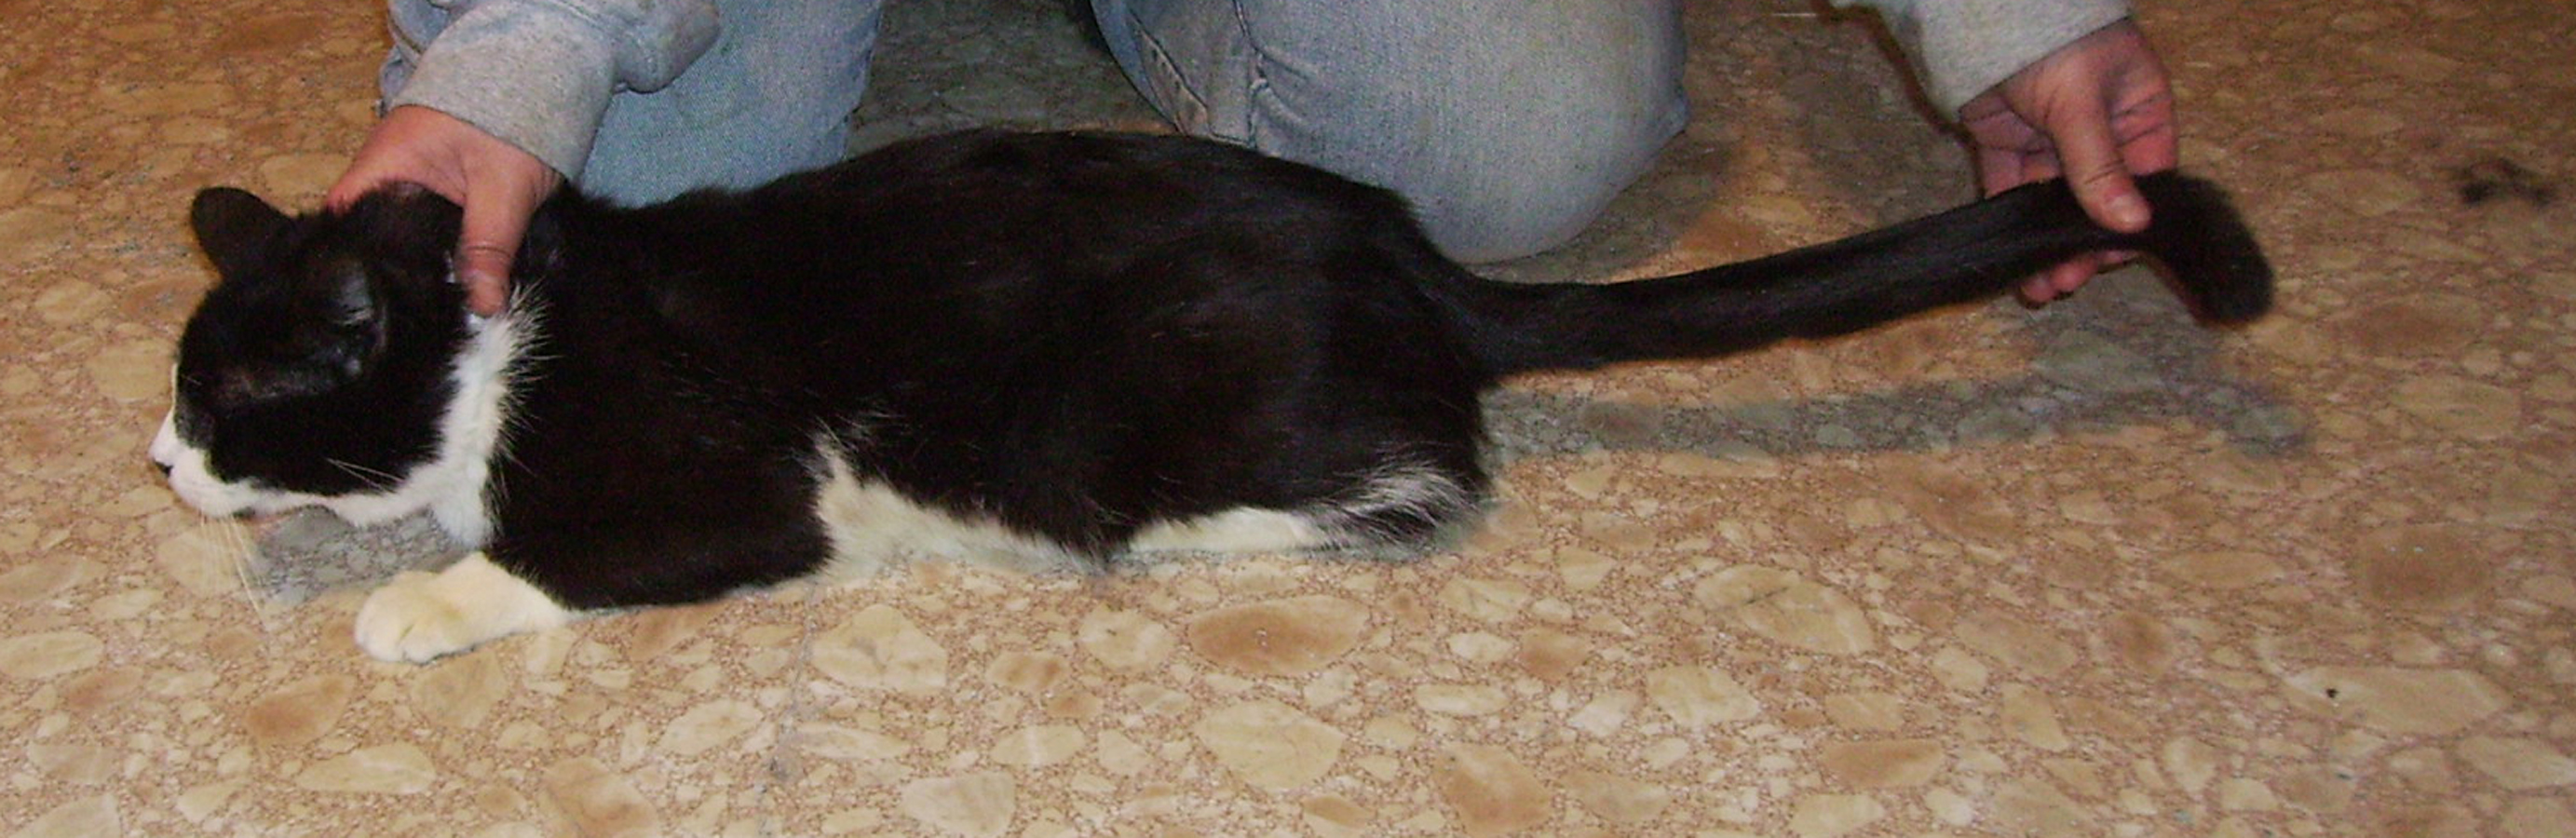 a cat sitting on a tile floor being held by a person